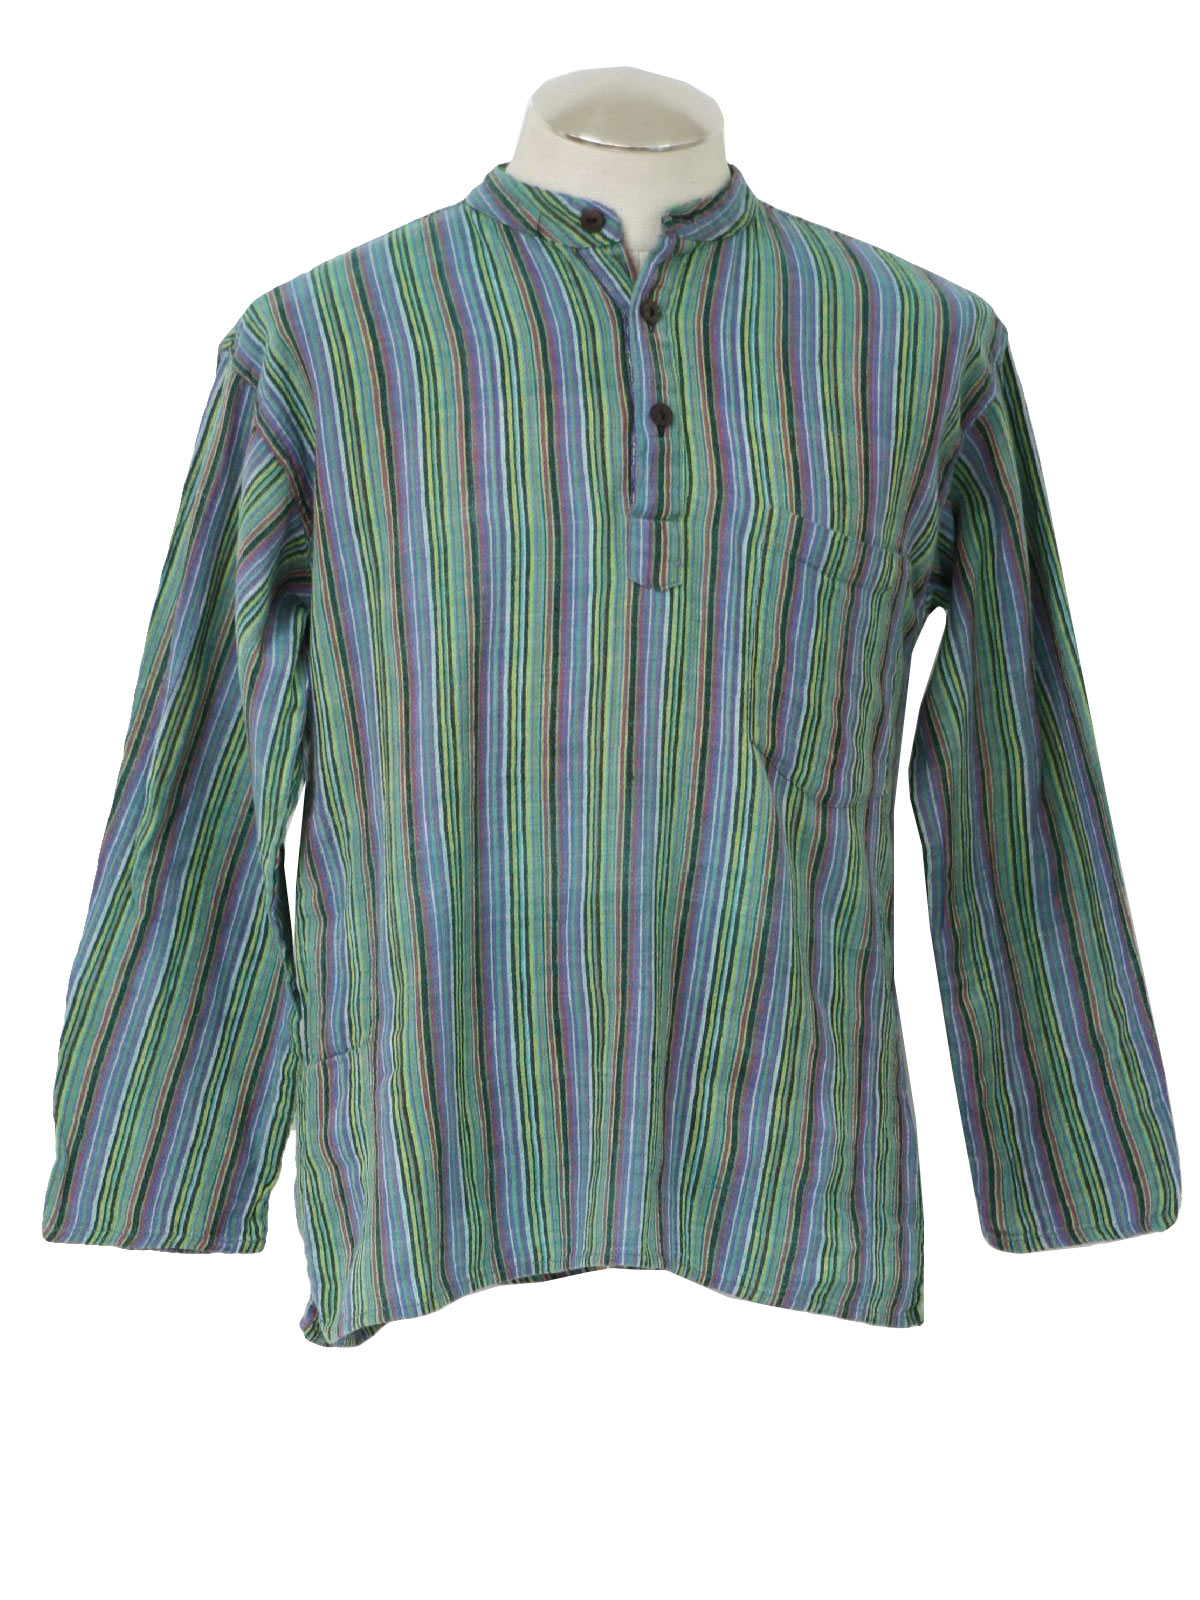 Vintage 1970's Hippie Shirt: 70s -fabric label- Mens shades of green ...